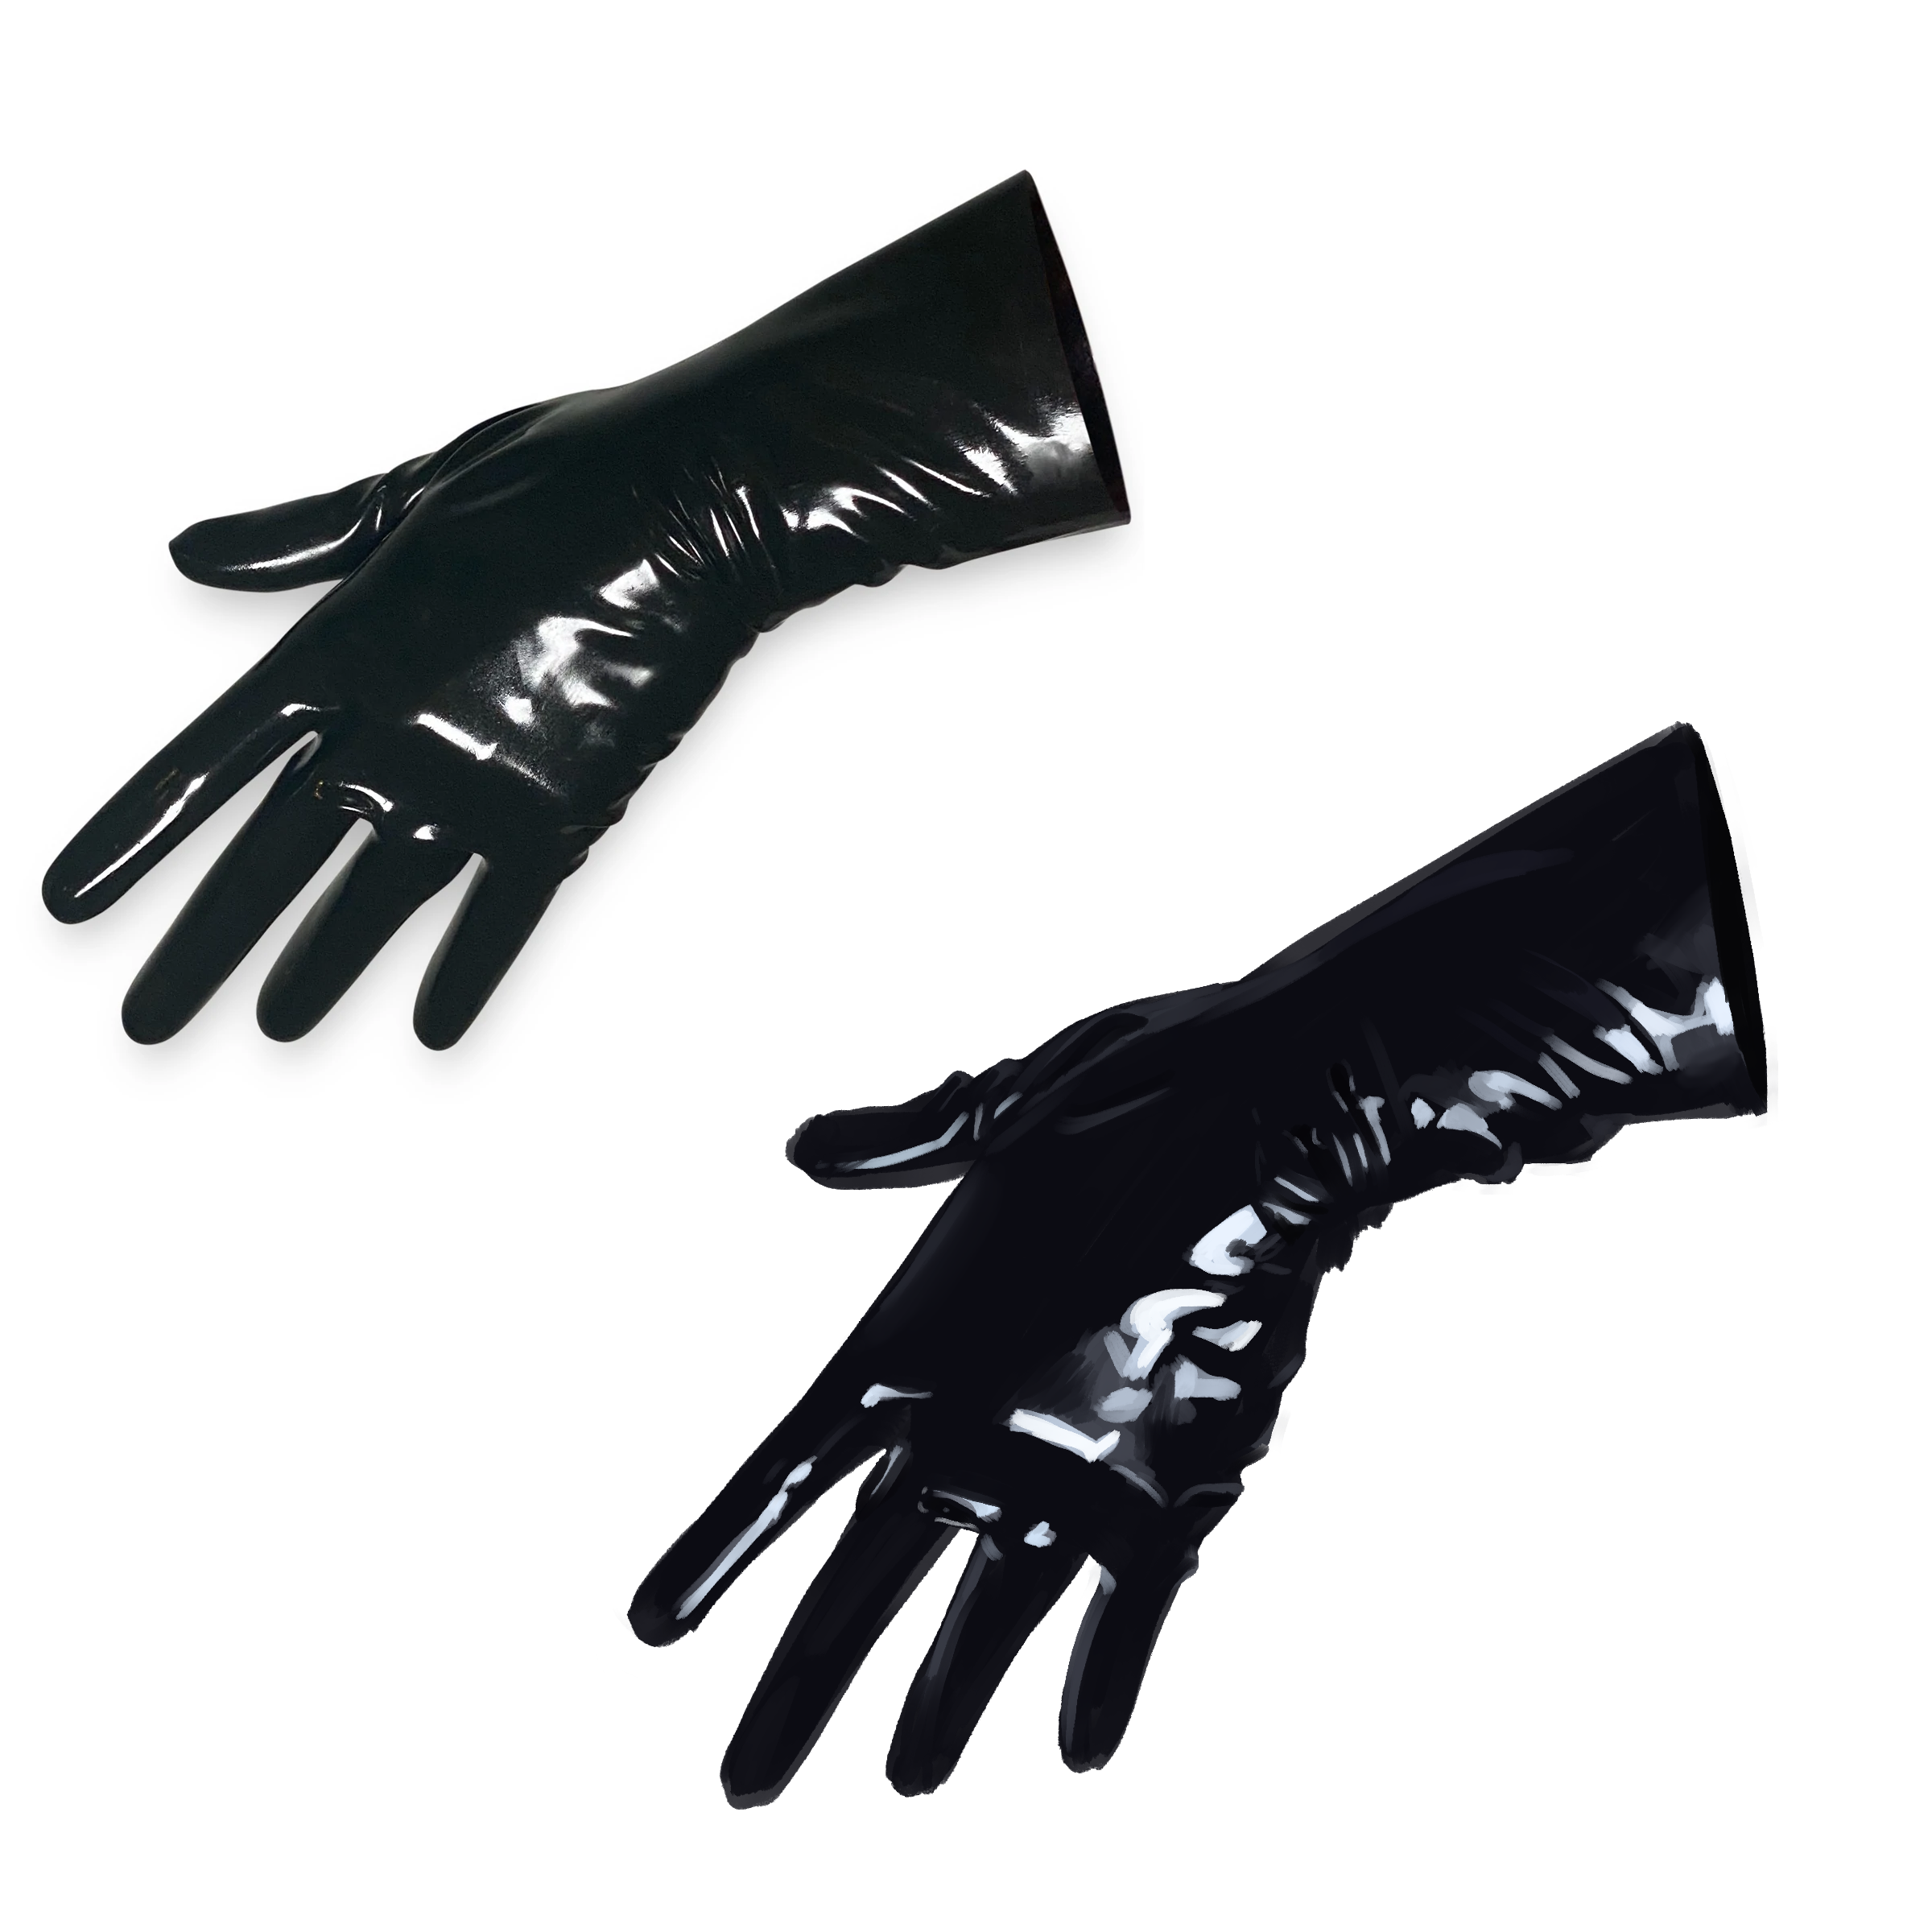 A digital study of a black rubber glove on a white background. The glove is rendered realistically and is side-by side with the reference image, which is nearly identical.